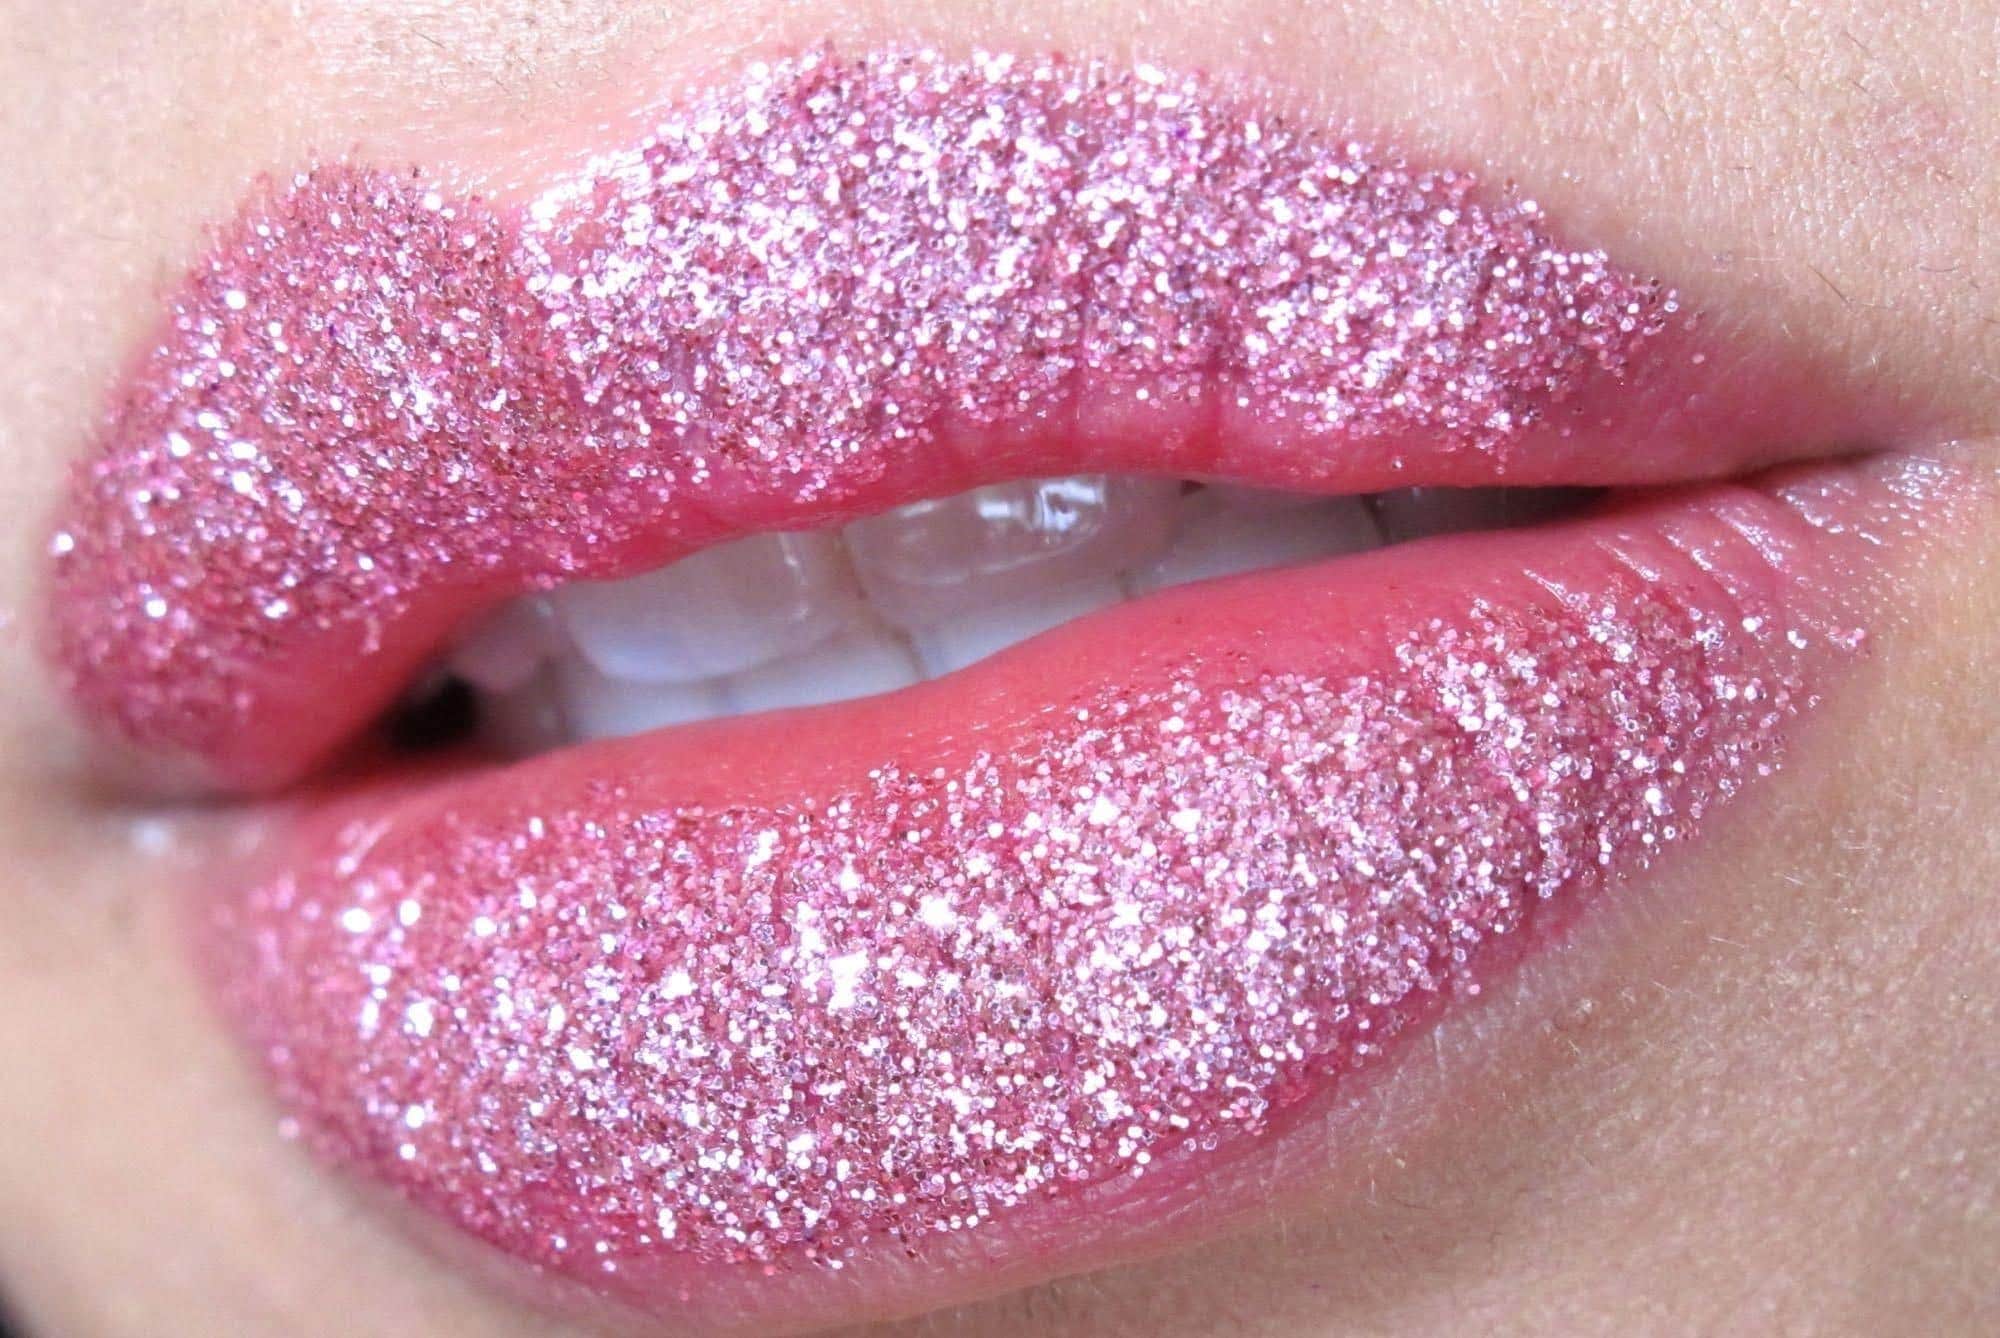 lips dream meaning, dream about lips, lips dream interpretation, seeing in a dream lips